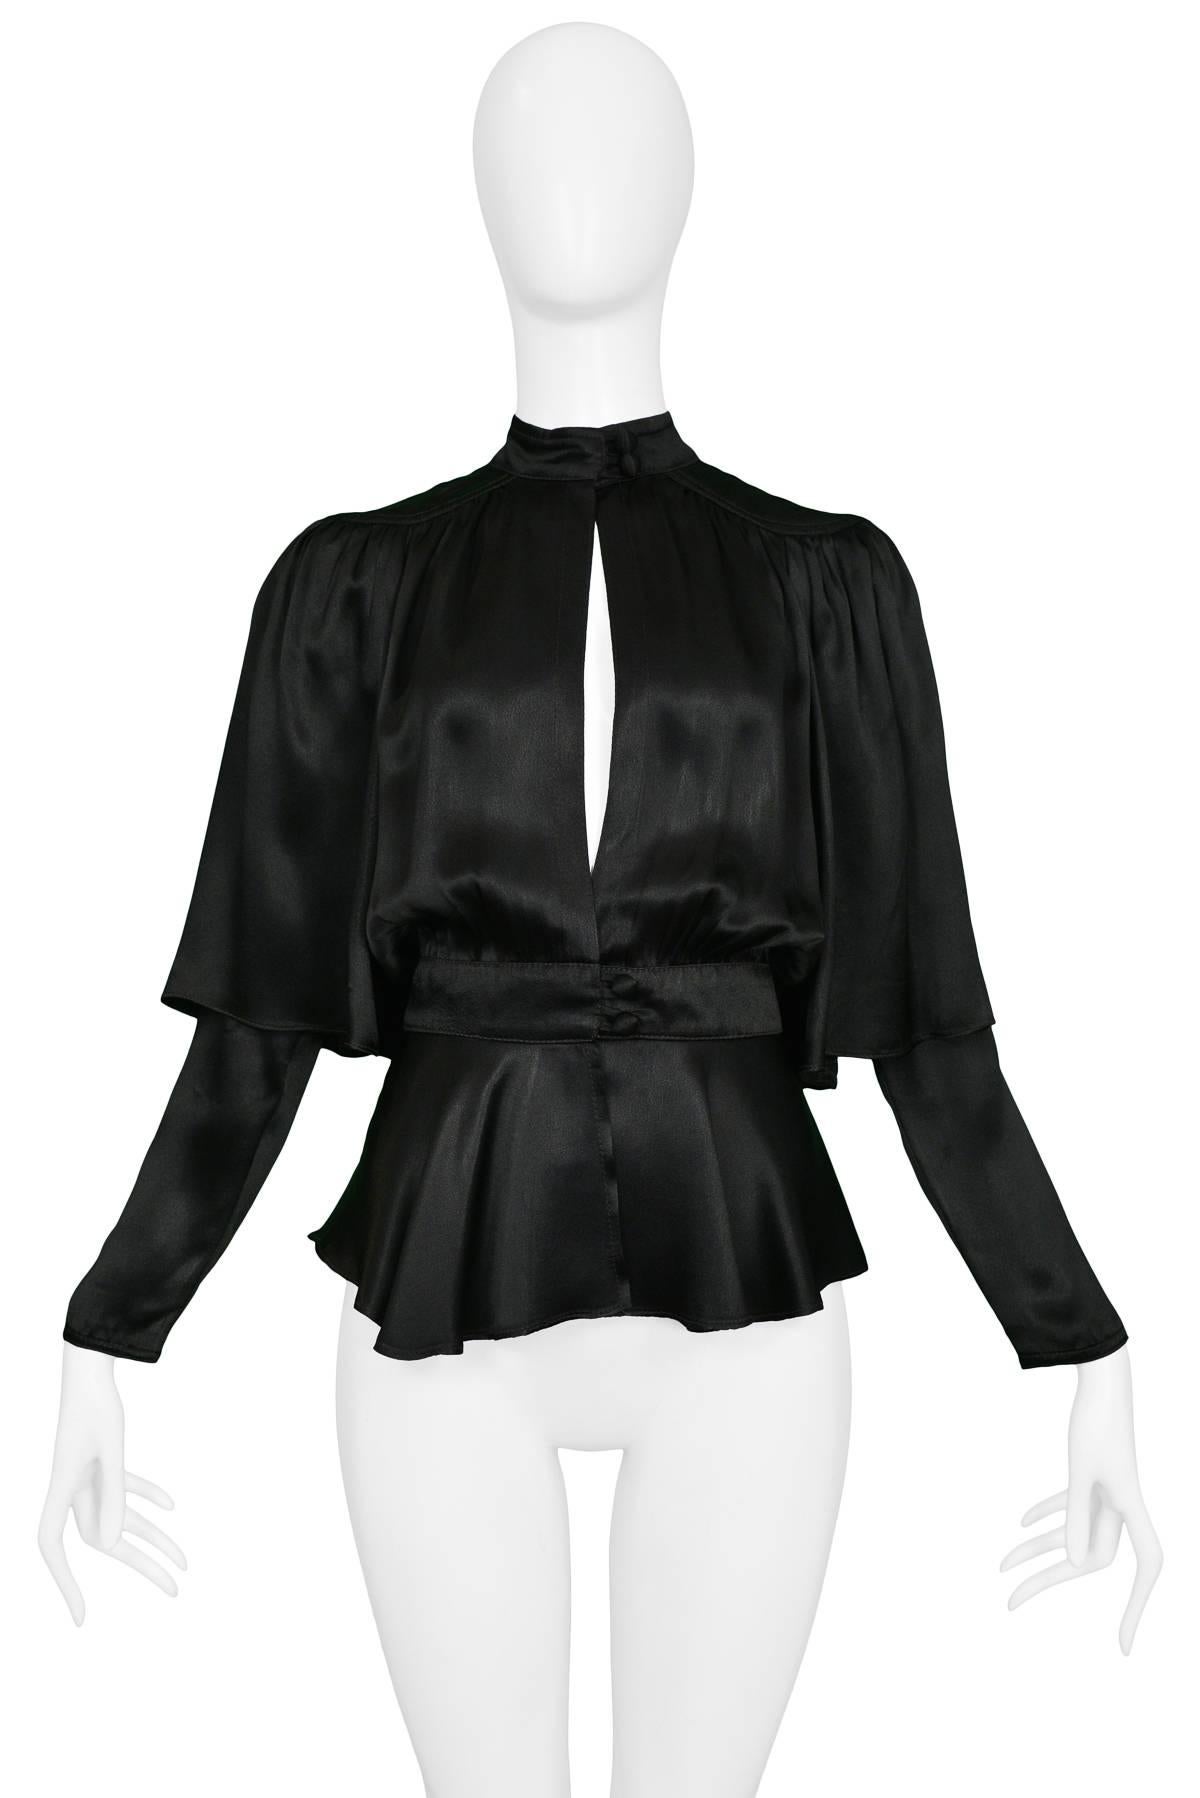 Ossie Clark Black Keyhole Cardinal Blouse In Excellent Condition In Los Angeles, CA